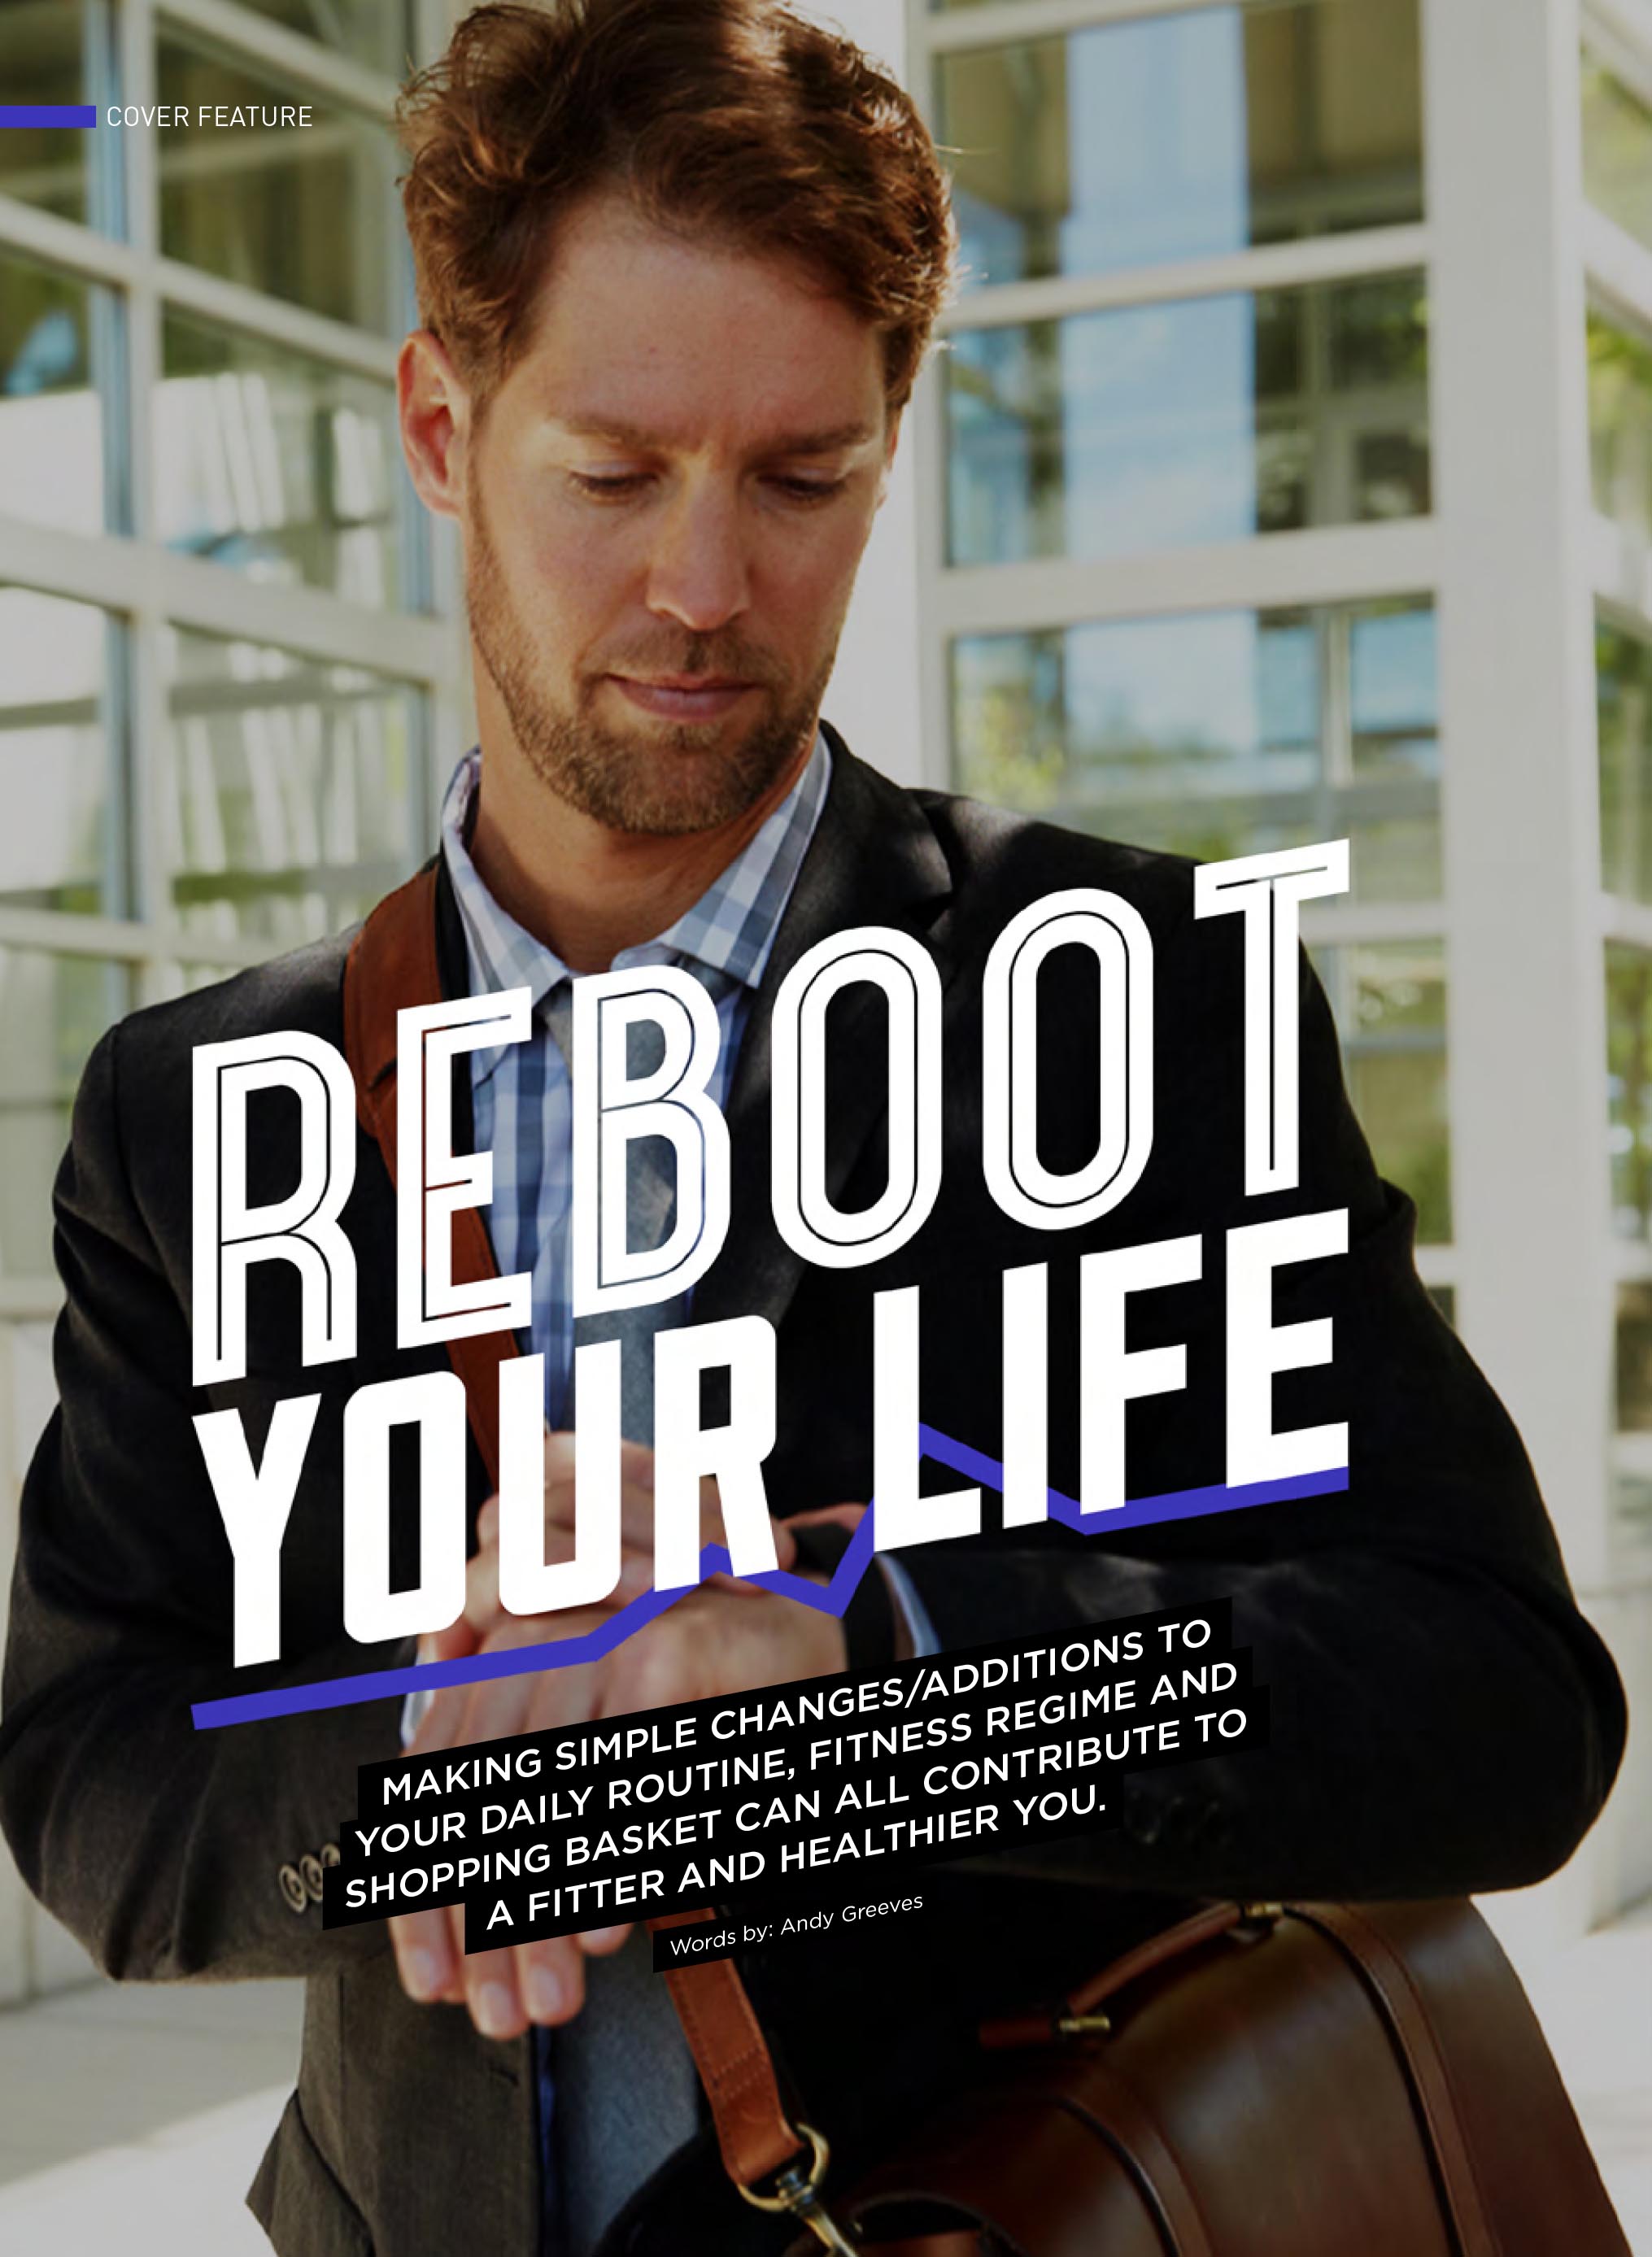 Bestfit Issue 10, Reboot your life cover.